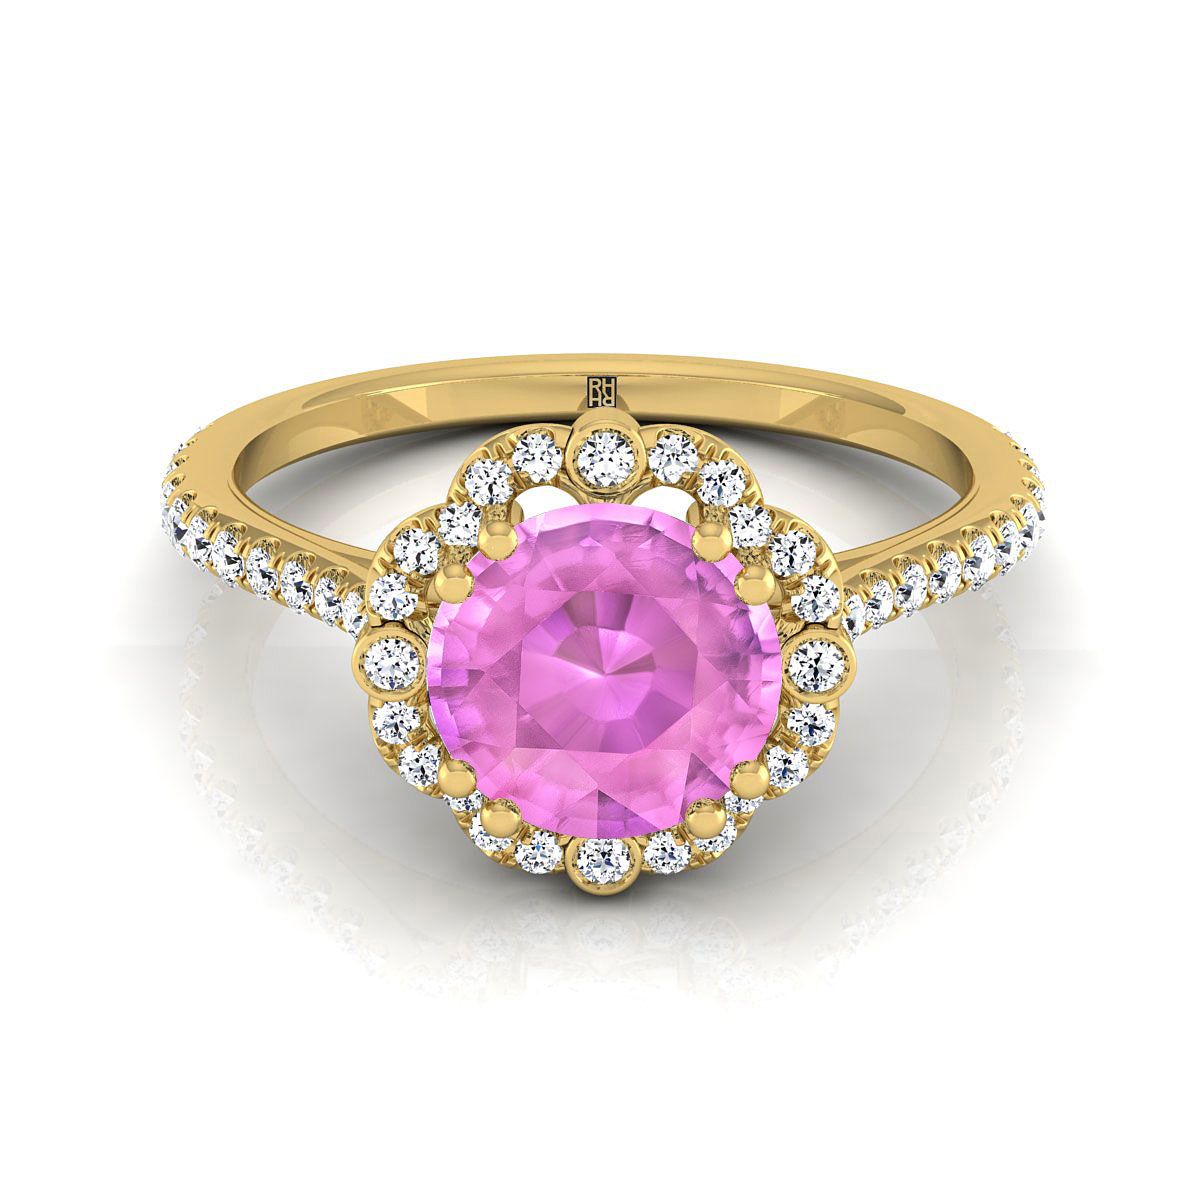 18K Yellow Gold Round Brilliant Pink Sapphire Ornate Diamond Halo Vintage Inspired Engagement Ring -1/4ctw